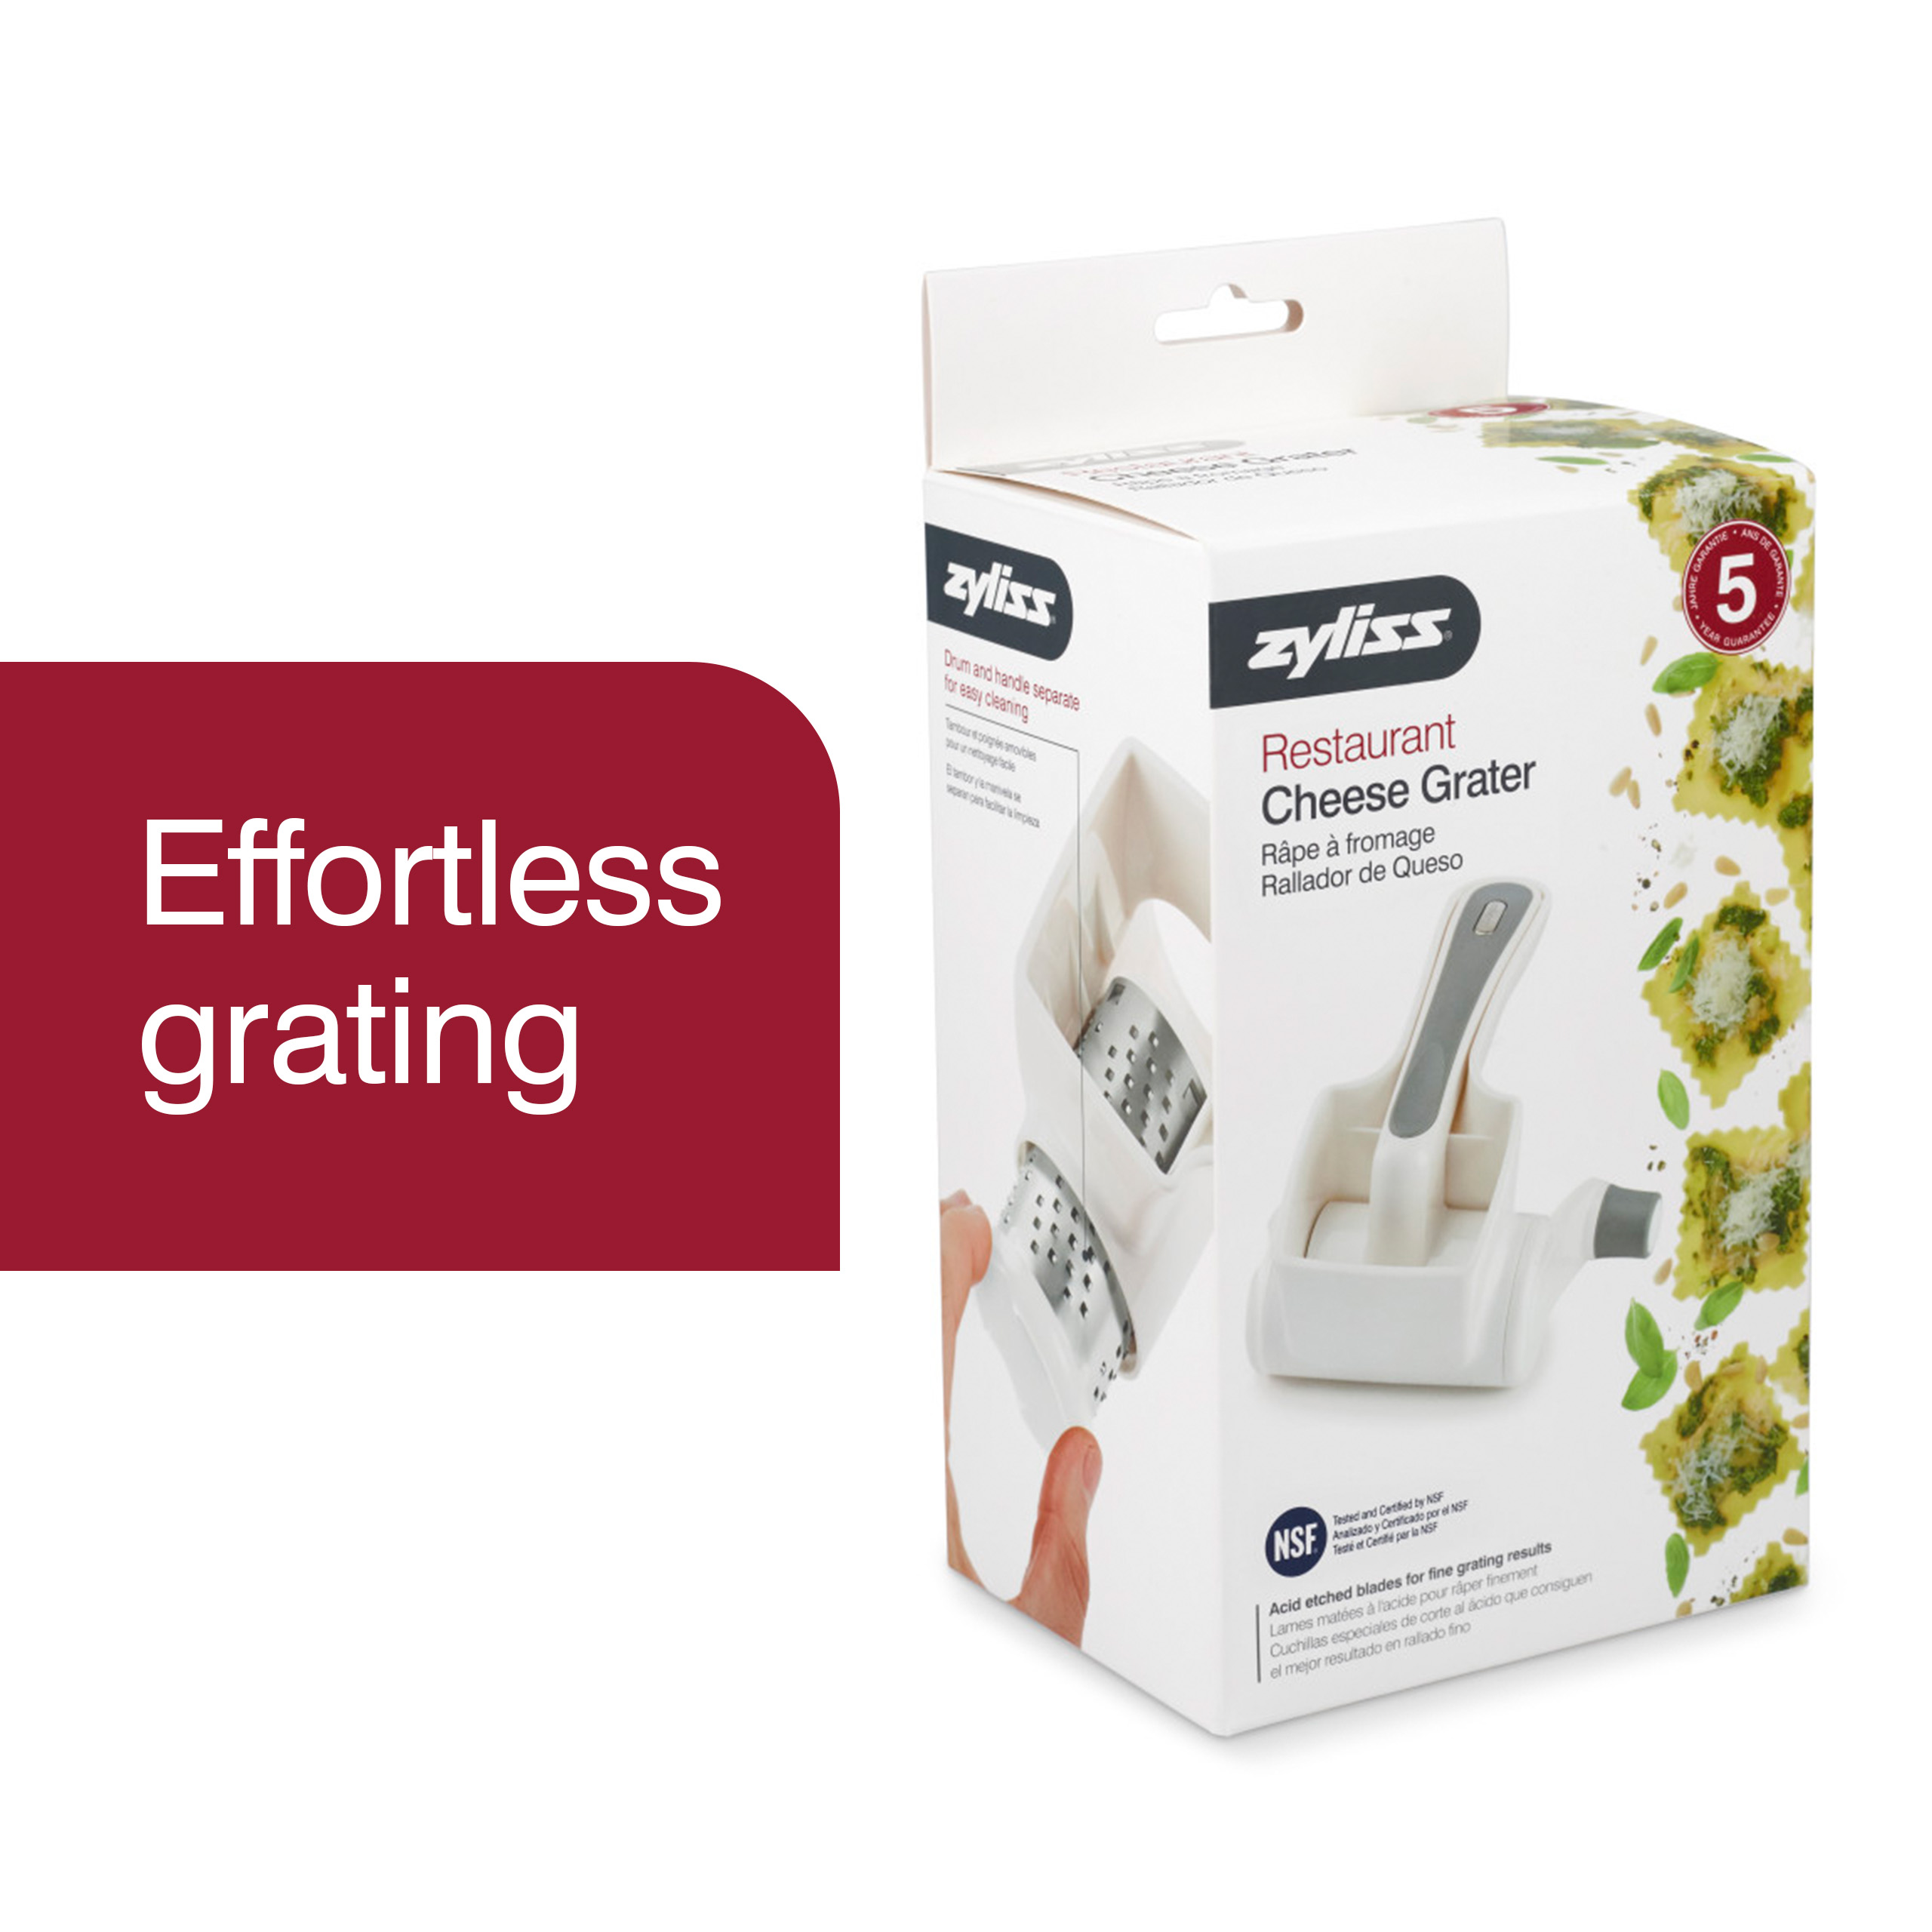 Zyliss Classic Rotary Cheese Grater food slicer quickly grates to save you  time » Gadget Flow